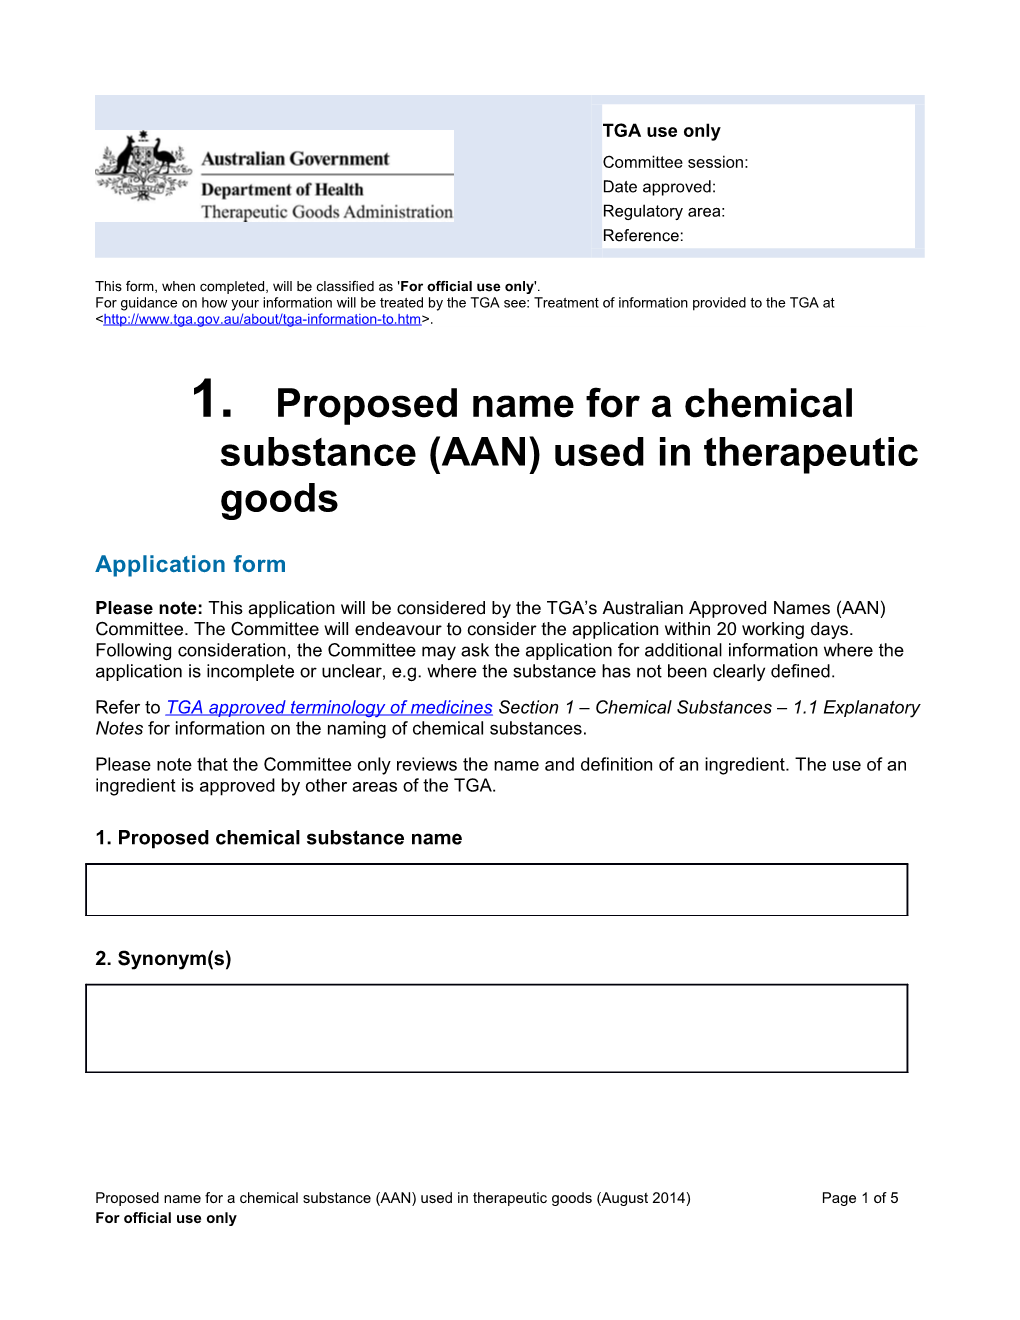 Proposed Name for a Chemical Substance (AAN) Used in Therapeutic Goods